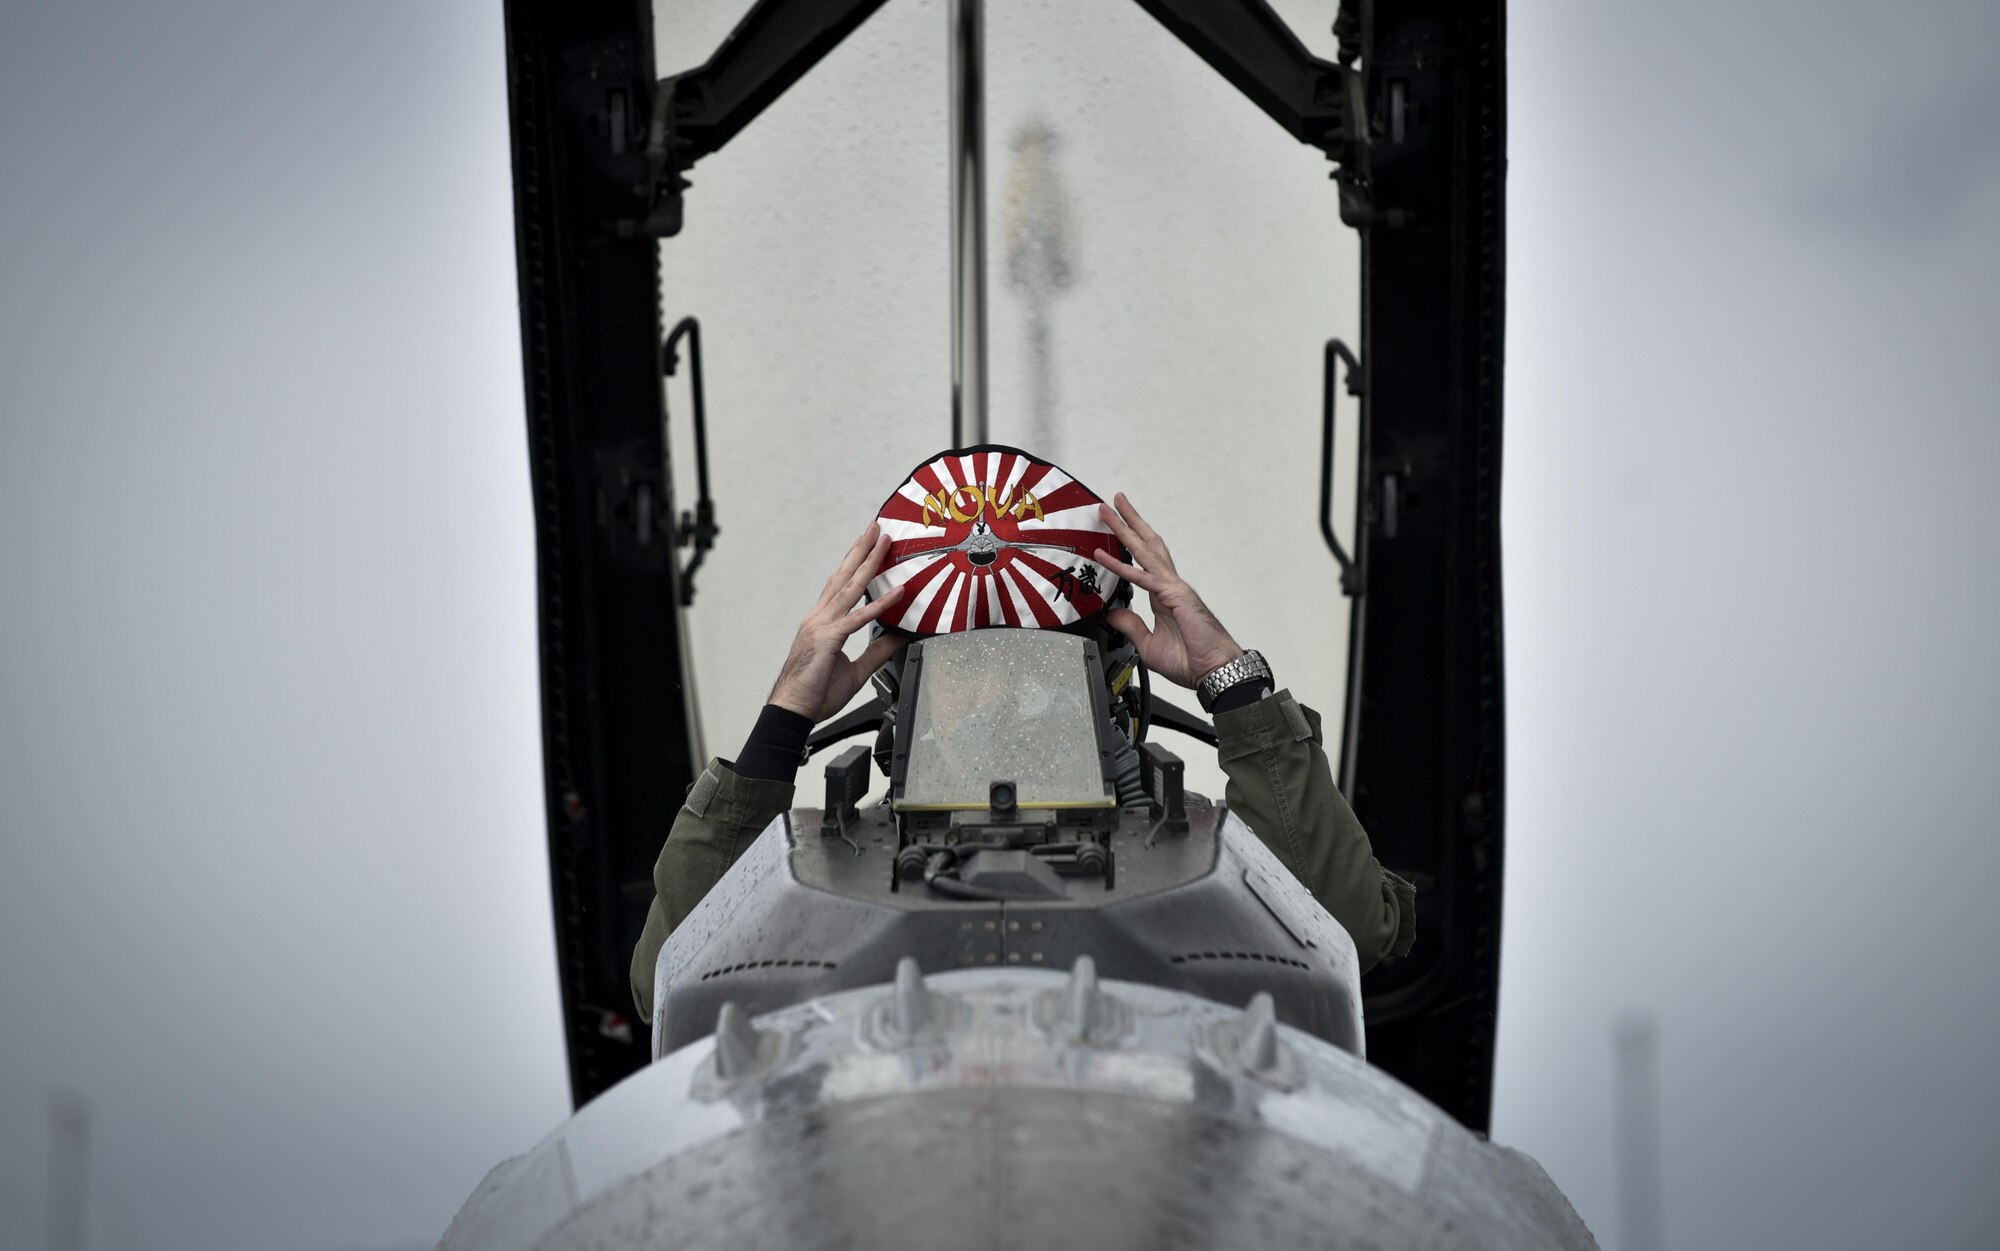 U.S. Air Force Capt. Dakota Newton, a 14th Fighter Squadron standards and evaluations liaison officer,  prepares to don his helmet prior to take off to participate in a bilateral exercise at Misawa Air Force Base, Japan, April 19, 2017. The bi-annual exercise incorporates a multitude of aircraft from the U.S. Air Force and Japanese Air Forces into air-to-air combat and suppression of enemy forces scenarios. The 35th Fighter Wing operates a fleet of more than 40 combat-ready aircraft to perform air superiority functions at a moment’s notice in compliance with war time contingencies. (U.S. Air Force photo by Staff Sgt. Melanie A. Hutto)